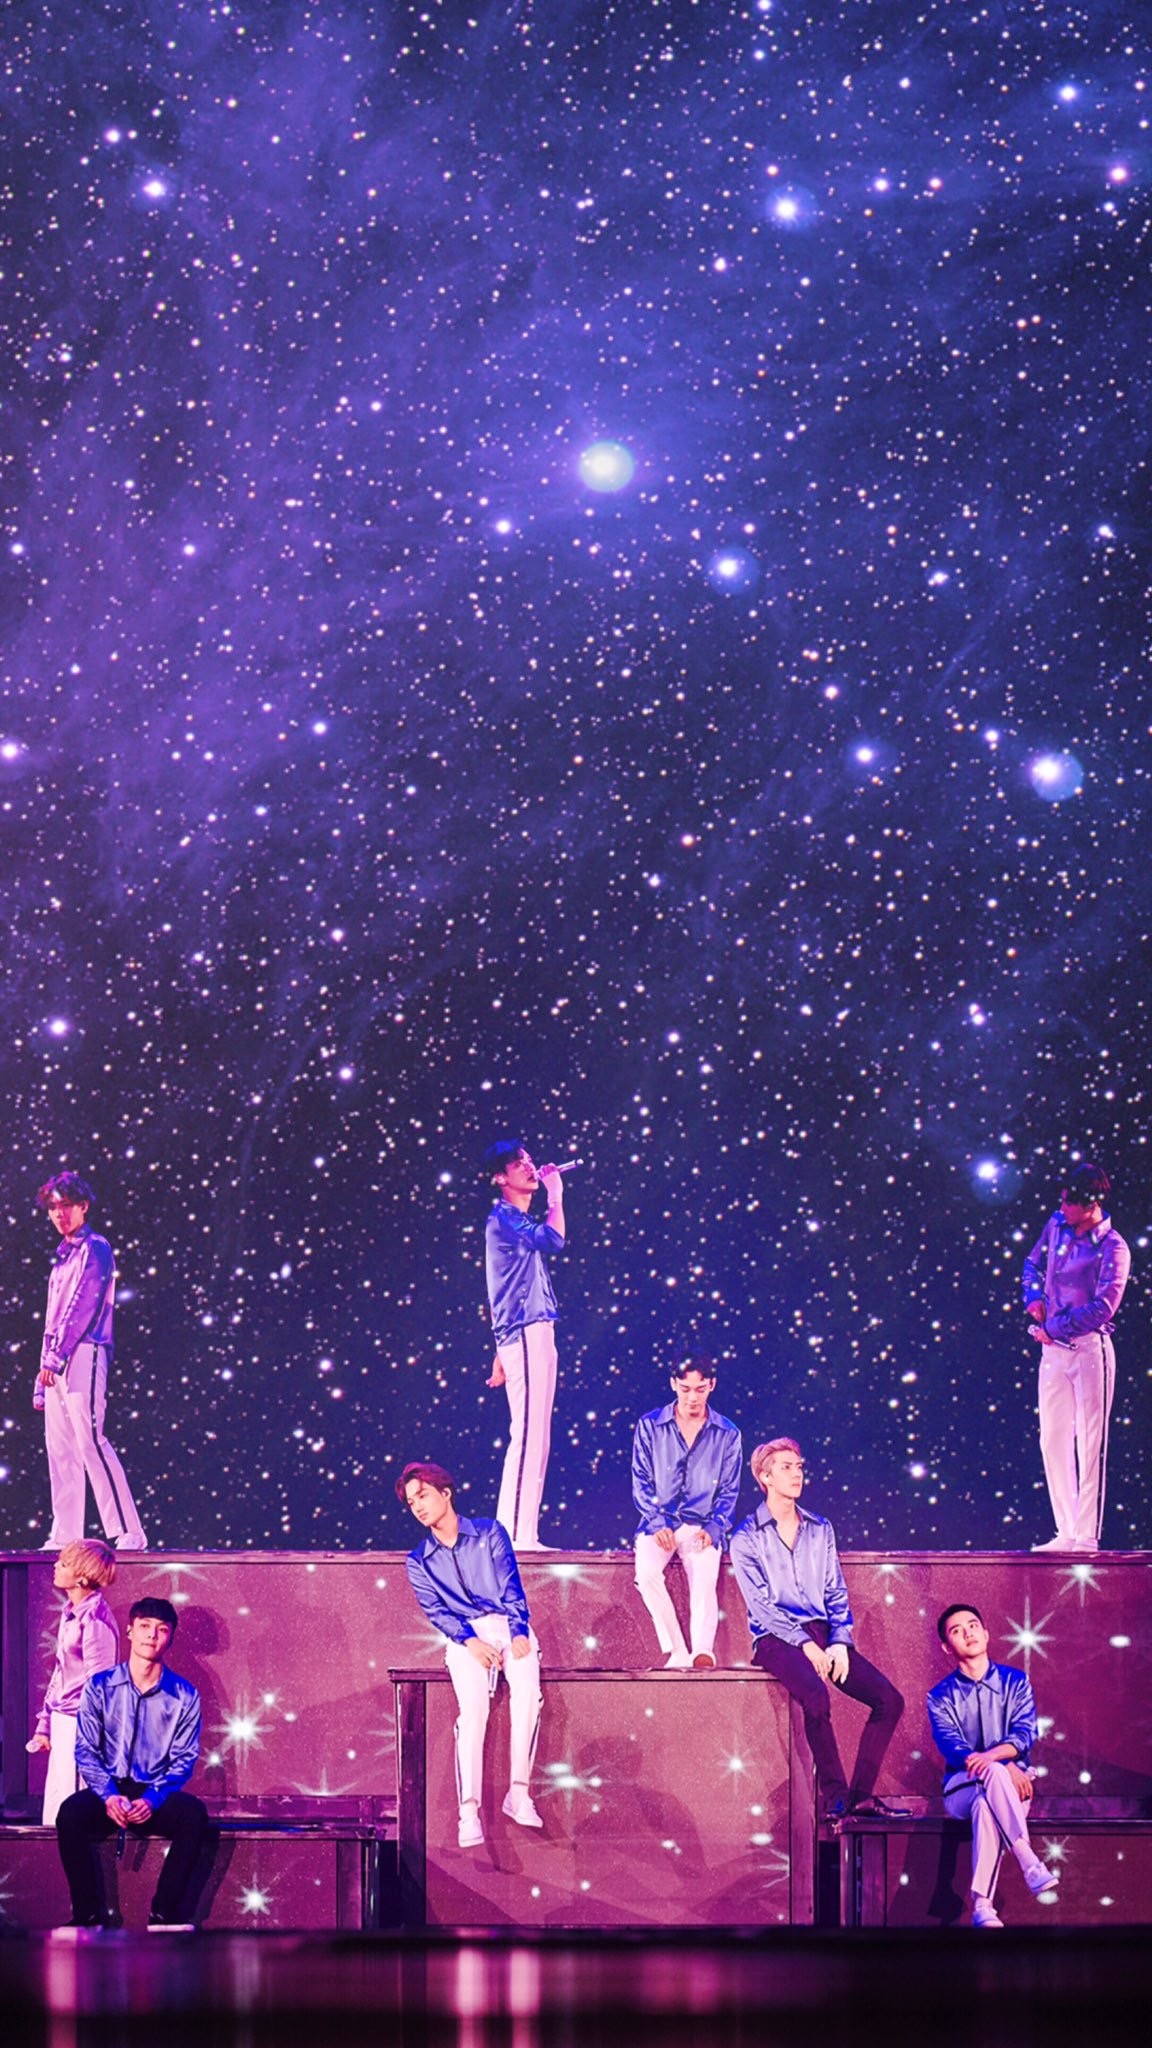 Exo Wallpaper HD (82+ images)